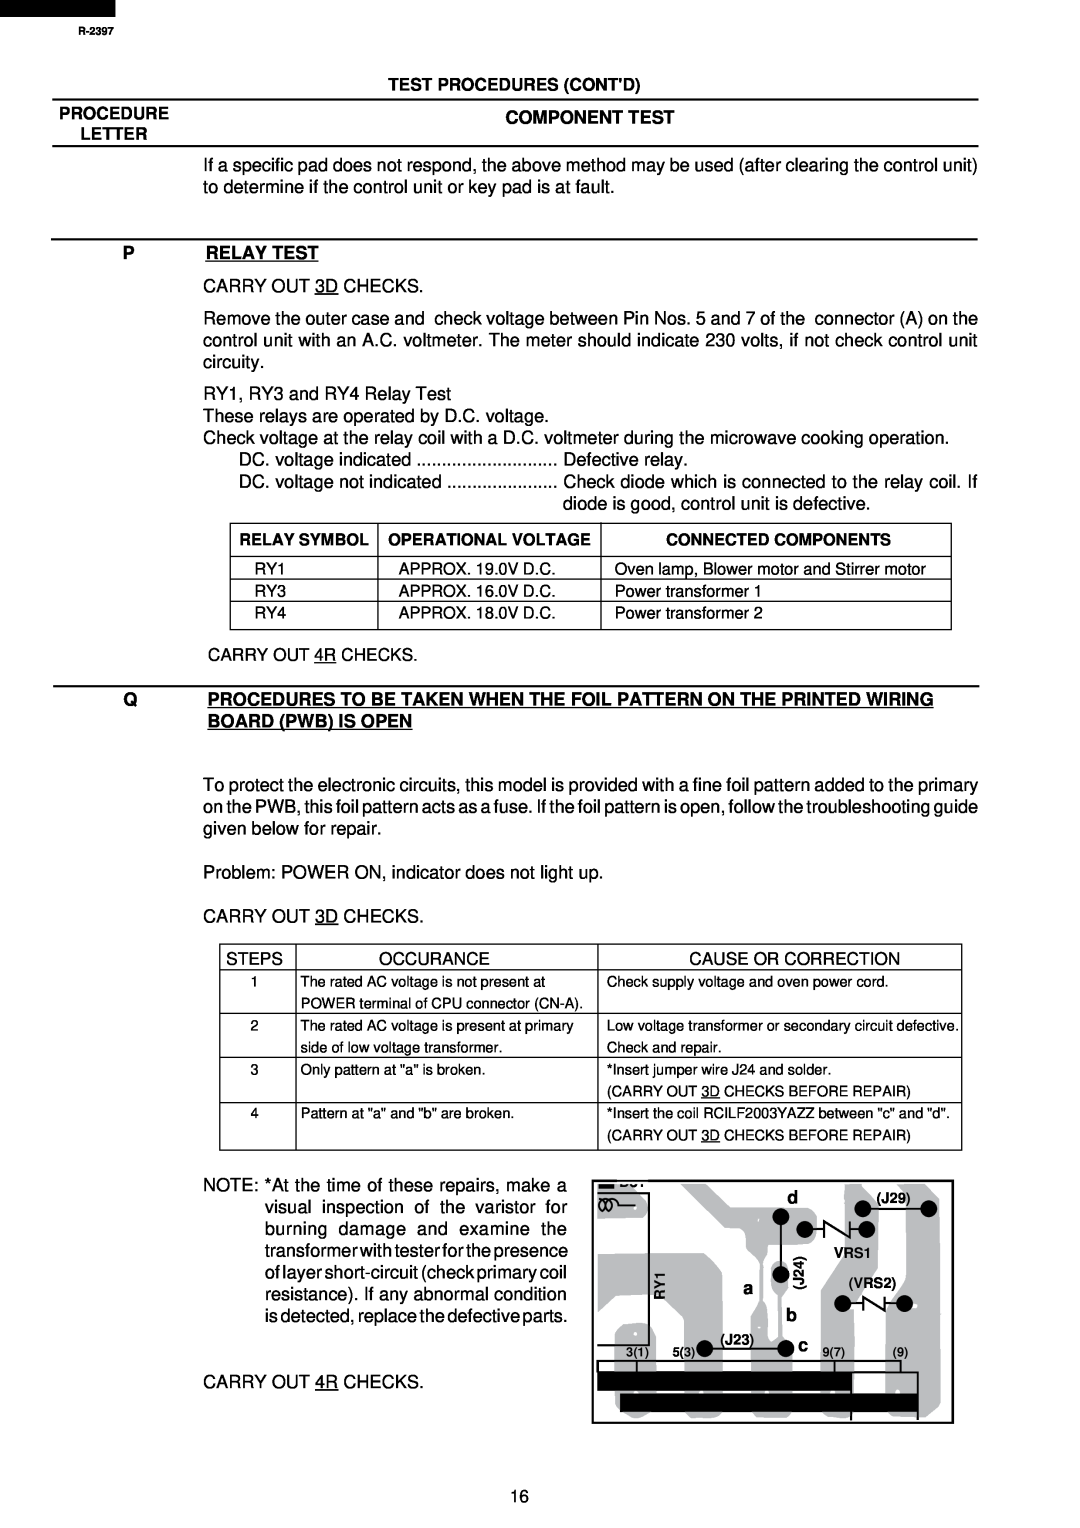 Sharp R-2397 service manual Test Procedures Contd, Component Test, Letter, Relay Test 